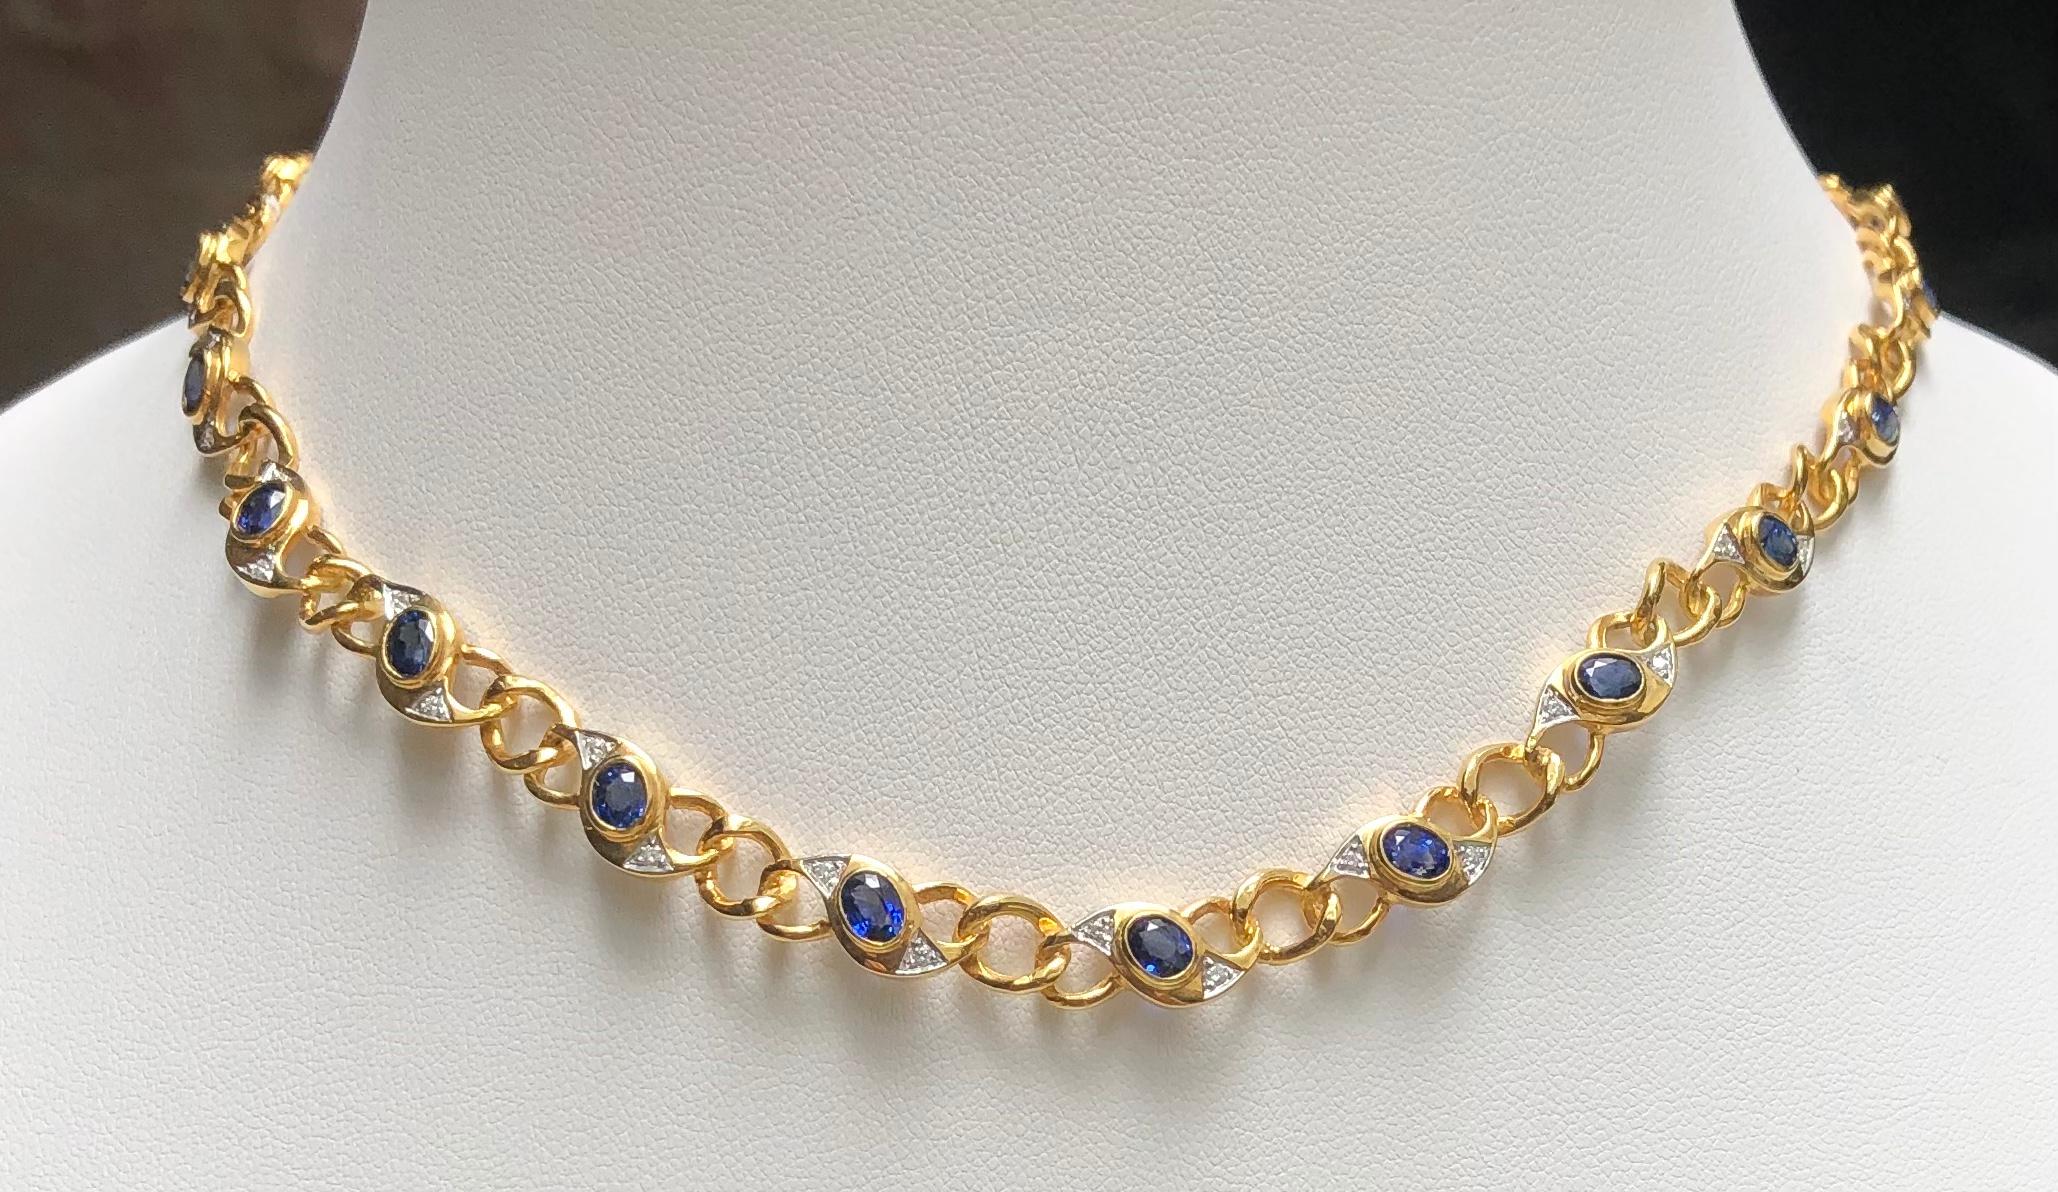 Blue Sapphire 9.18 carats with Diamond 0.51 carat Necklace set in 18 Karat Gold Settings

Width:  0.8 cm 
Length: 42.0 cm
Total Weight: 38.3 grams

